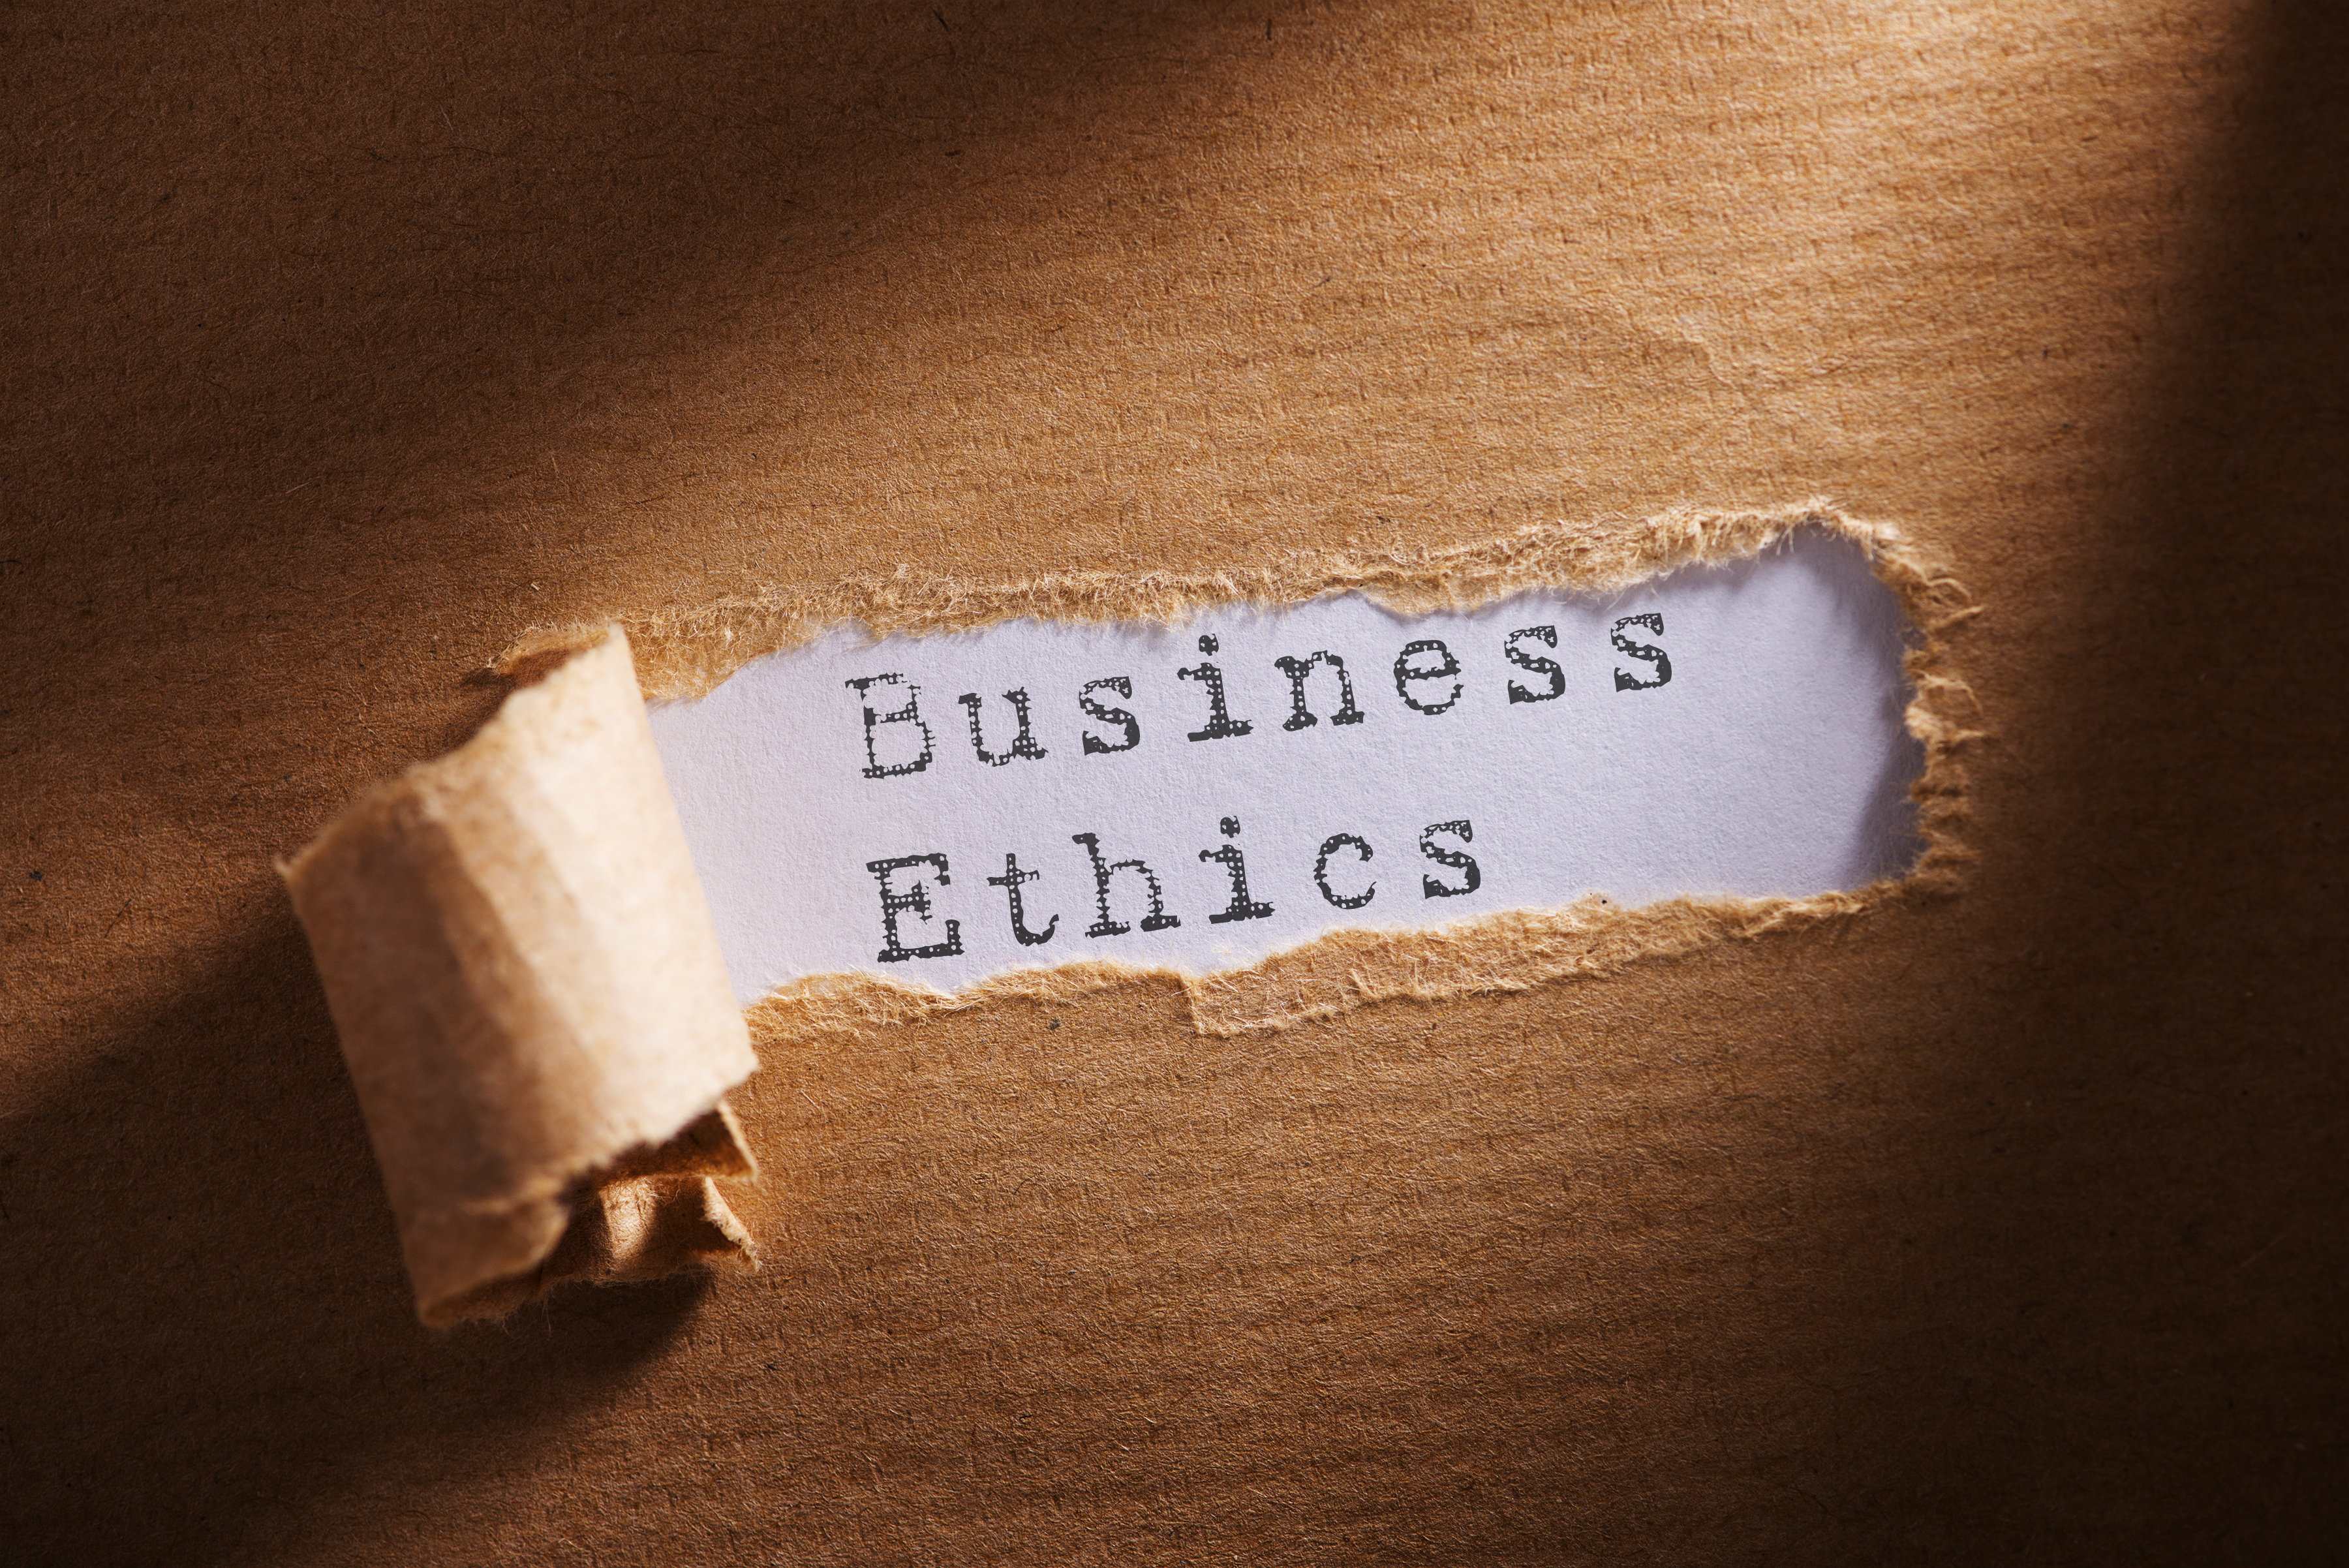 Top 8 Business Ethics to Look for in a Company